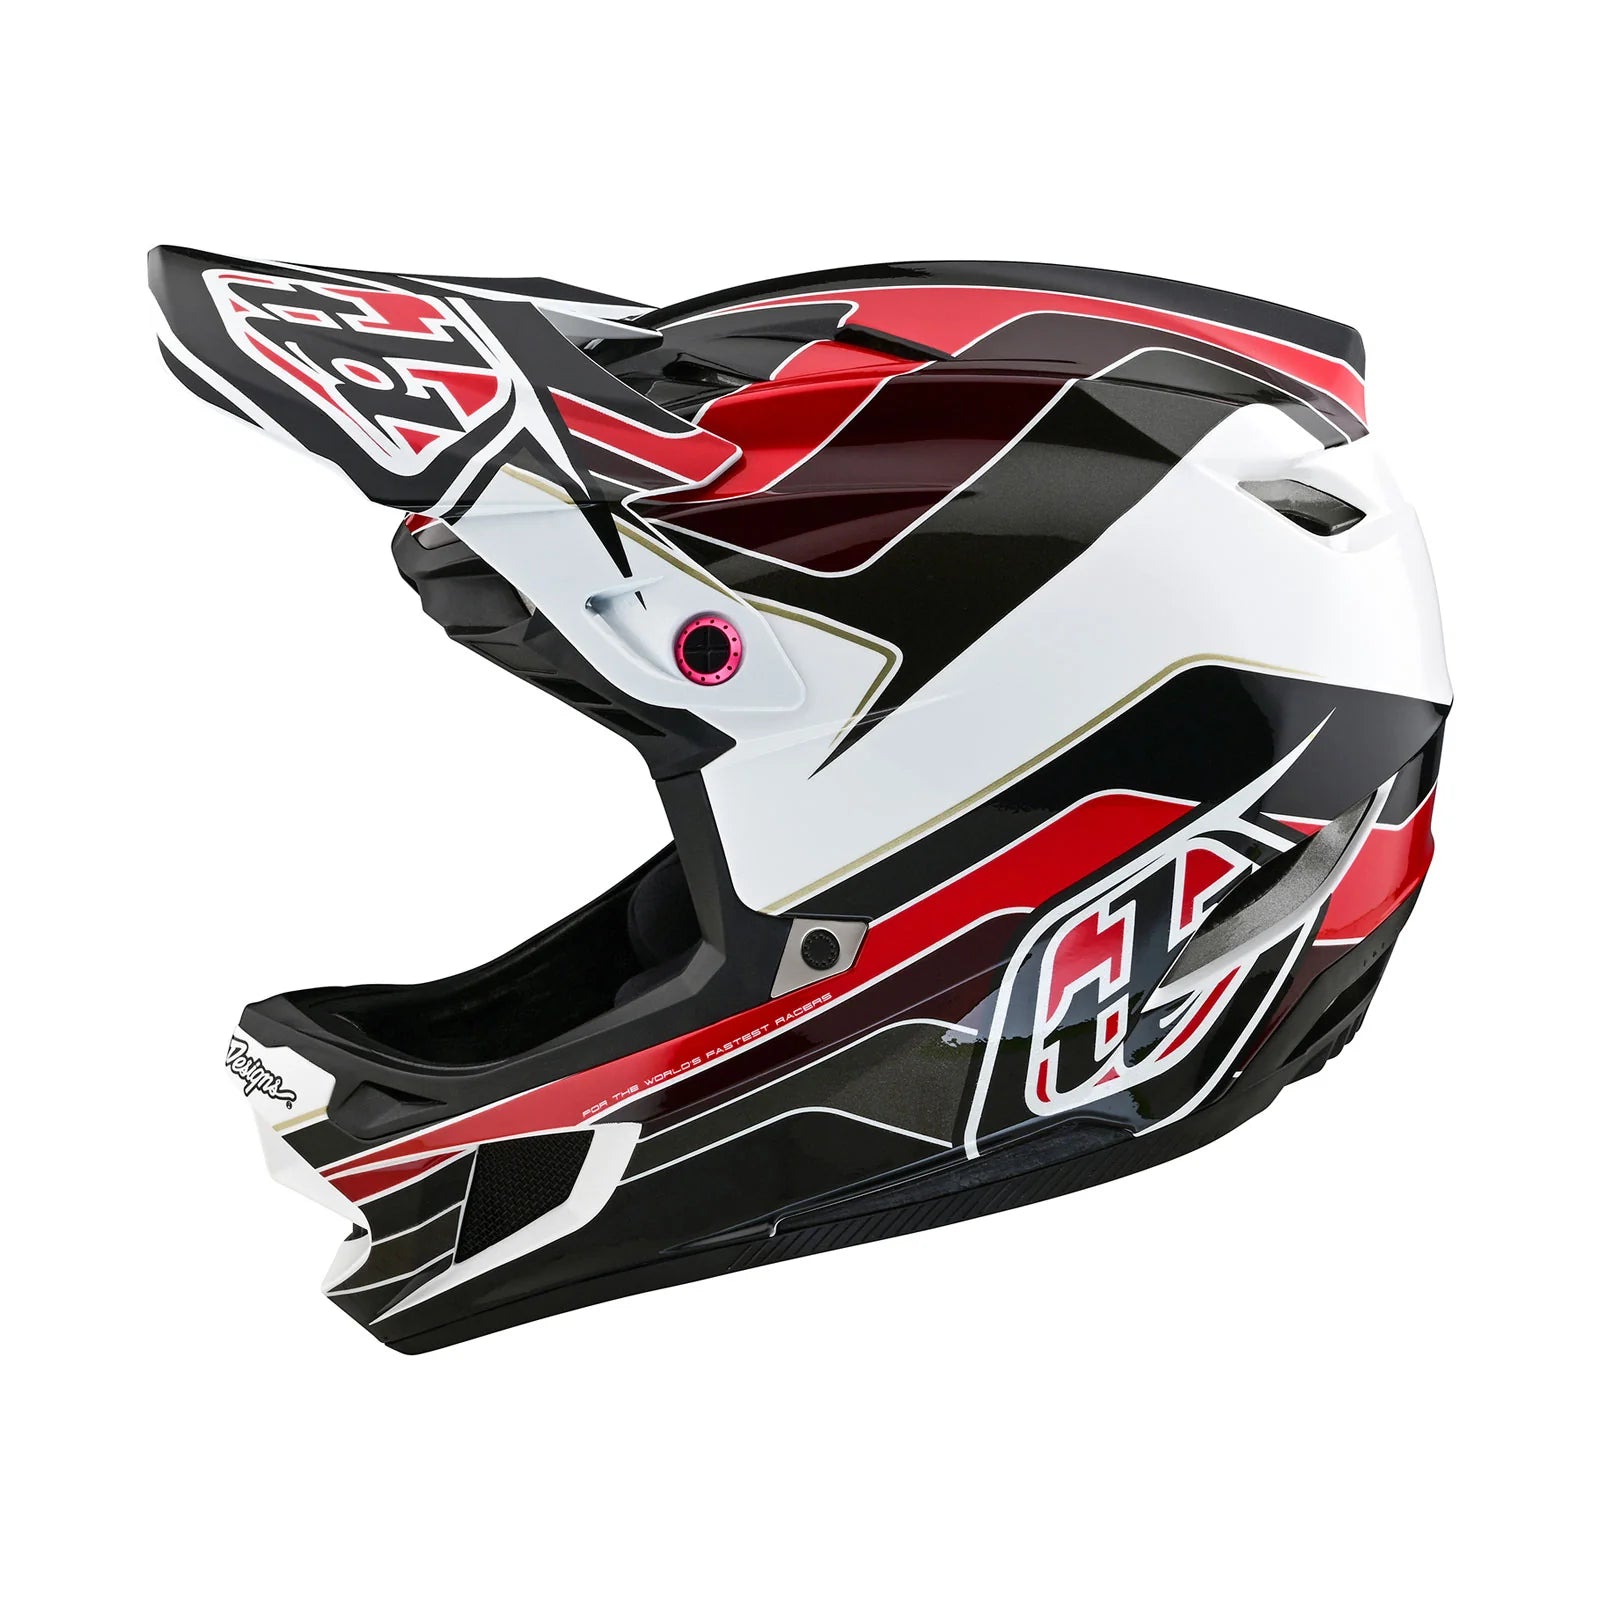 A TLD D4 AS Polyacrylite helmet with a black and red design, ensuring safety.